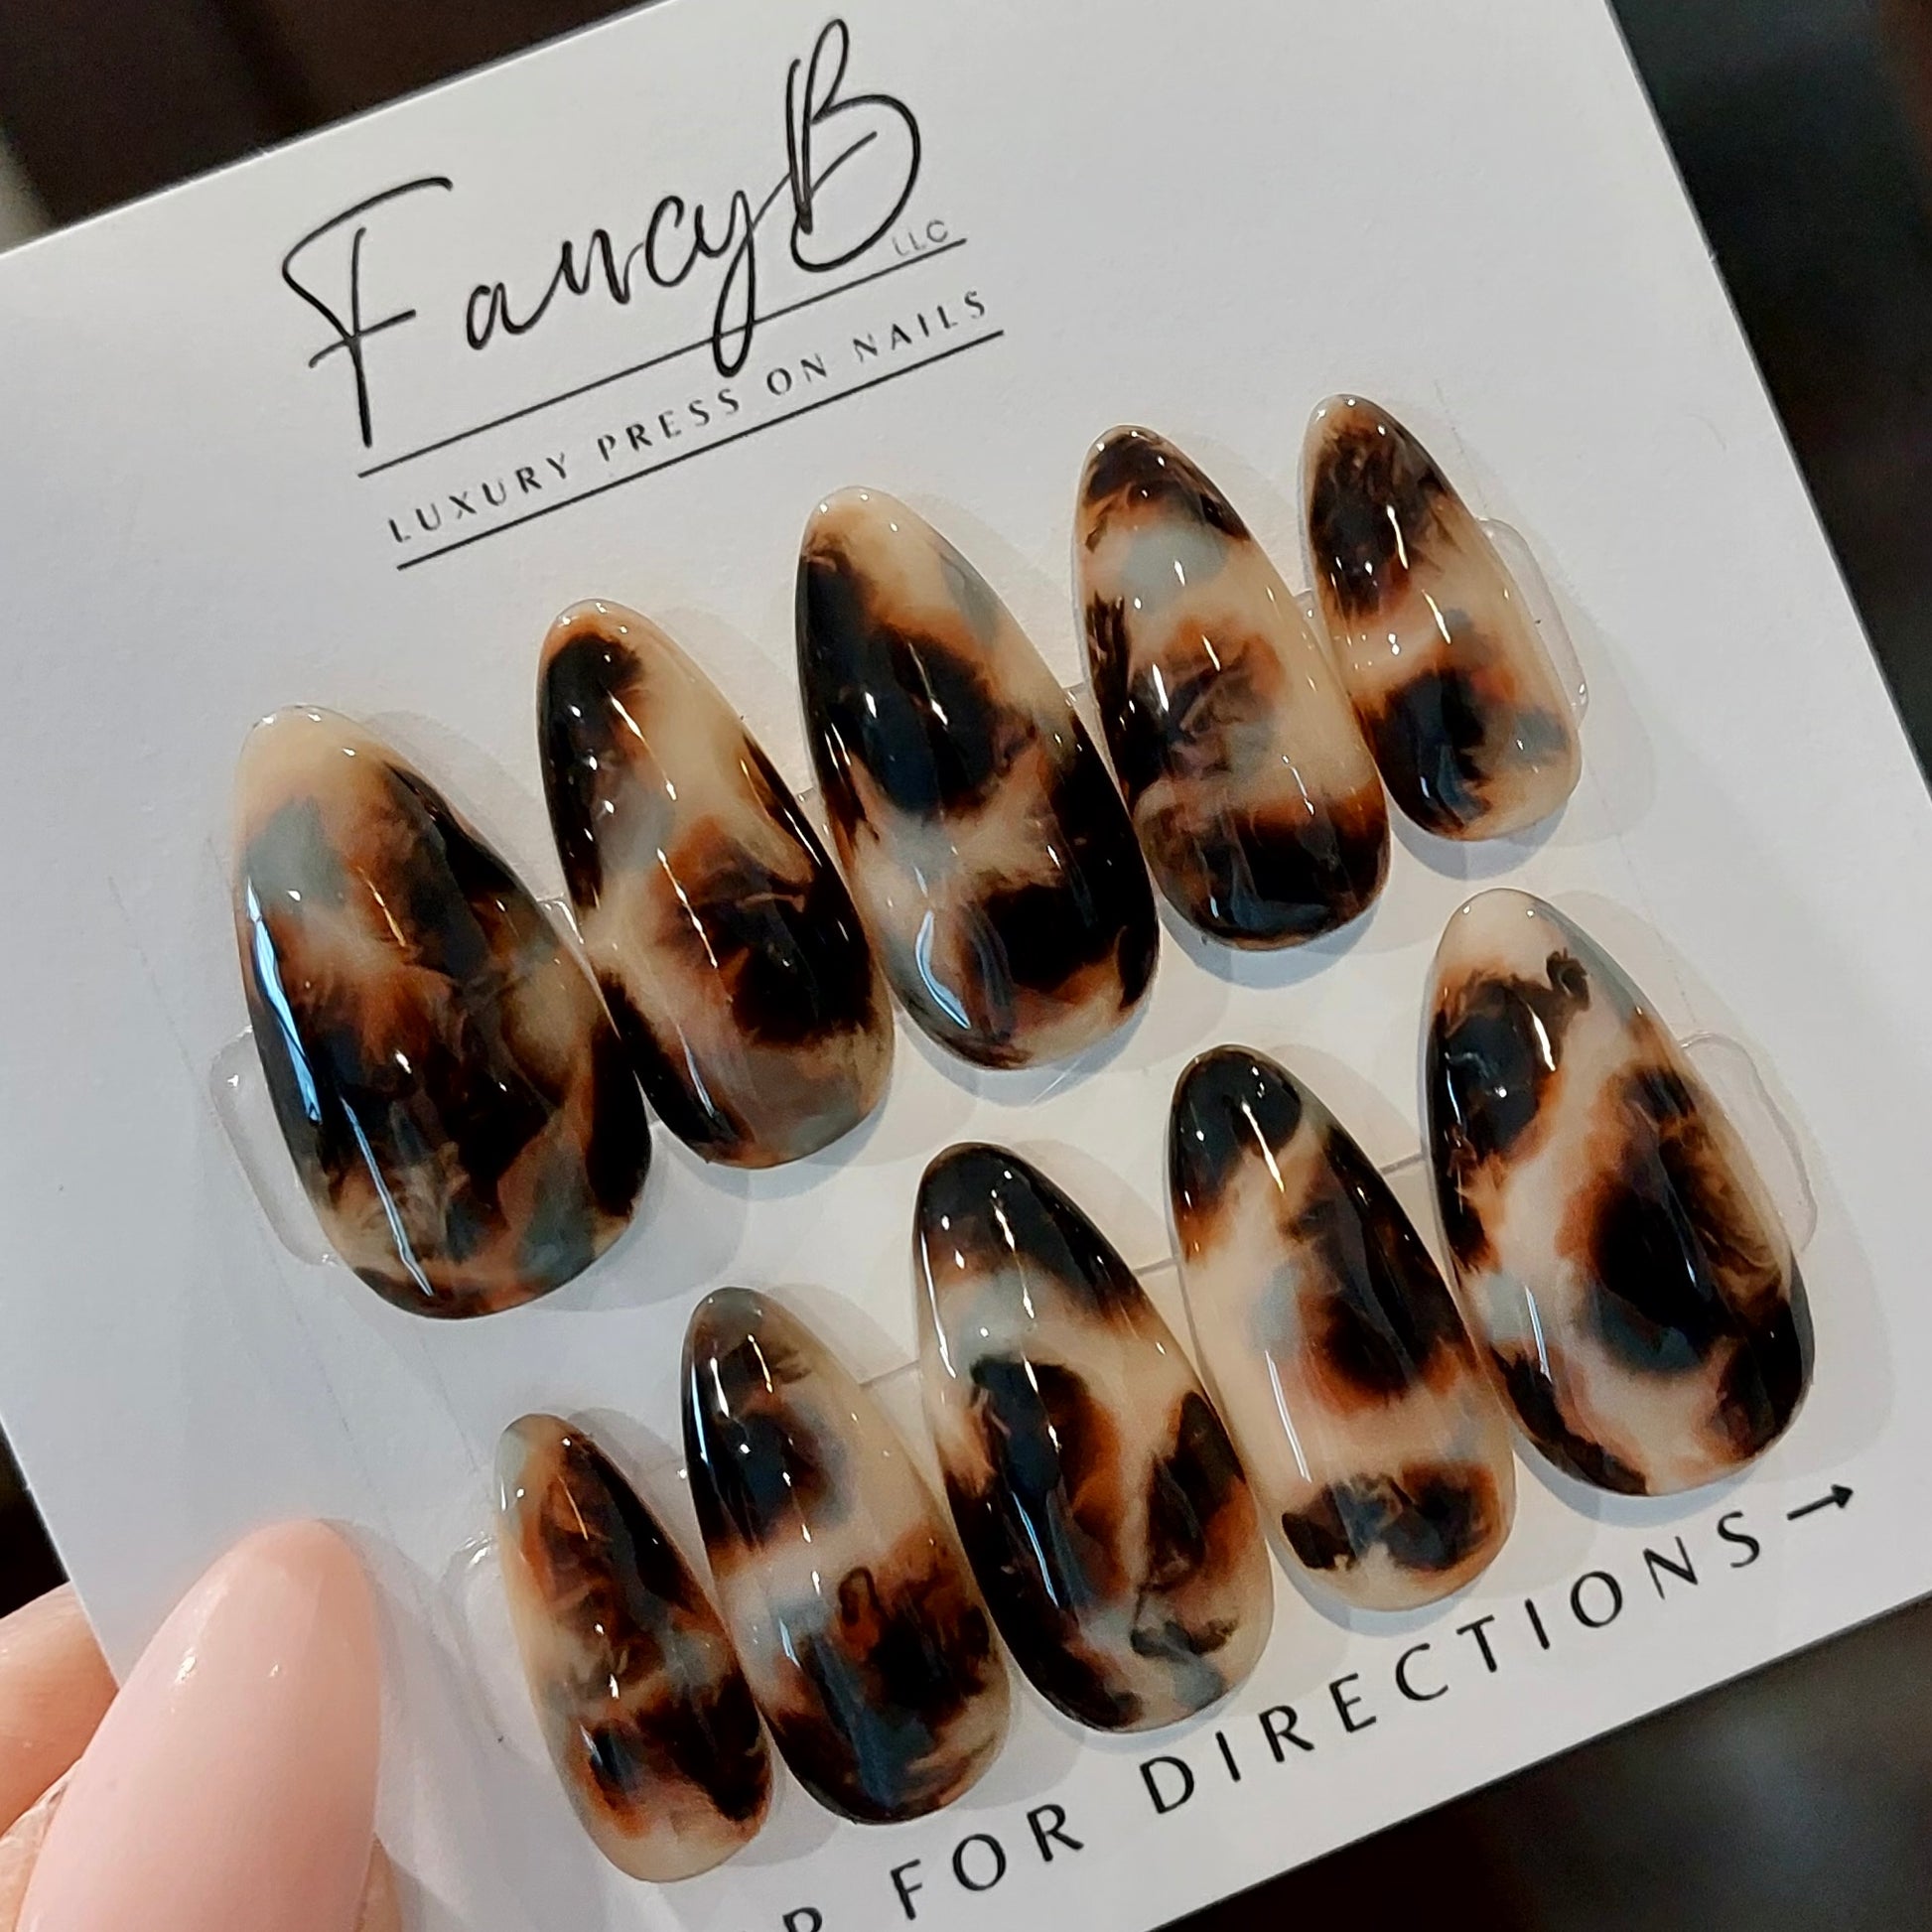 custom hand painted tortoiseshell press on nails in long almond shape. Layers of gel and high gloss finish. FancyB Luxury Nails.